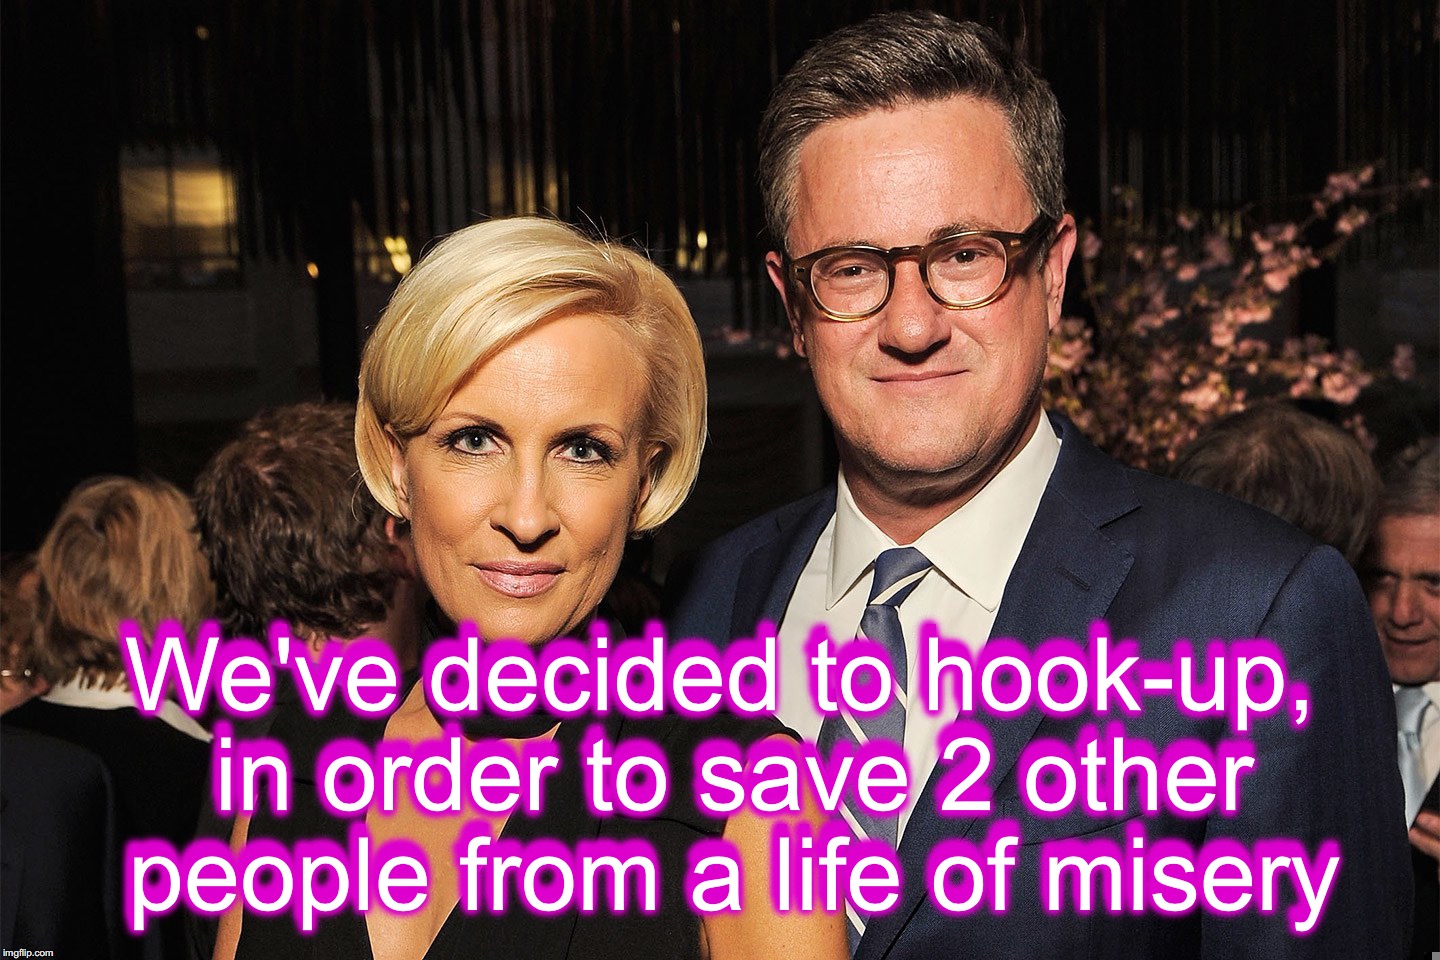 how thoughtful of them! | We've decided to hook-up, in order to save 2 other people from a life of misery; We've decided to hook-up, in order to save 2 other people from a life of misery | image tagged in morning joe,mika brzezinski,joe scarborough | made w/ Imgflip meme maker